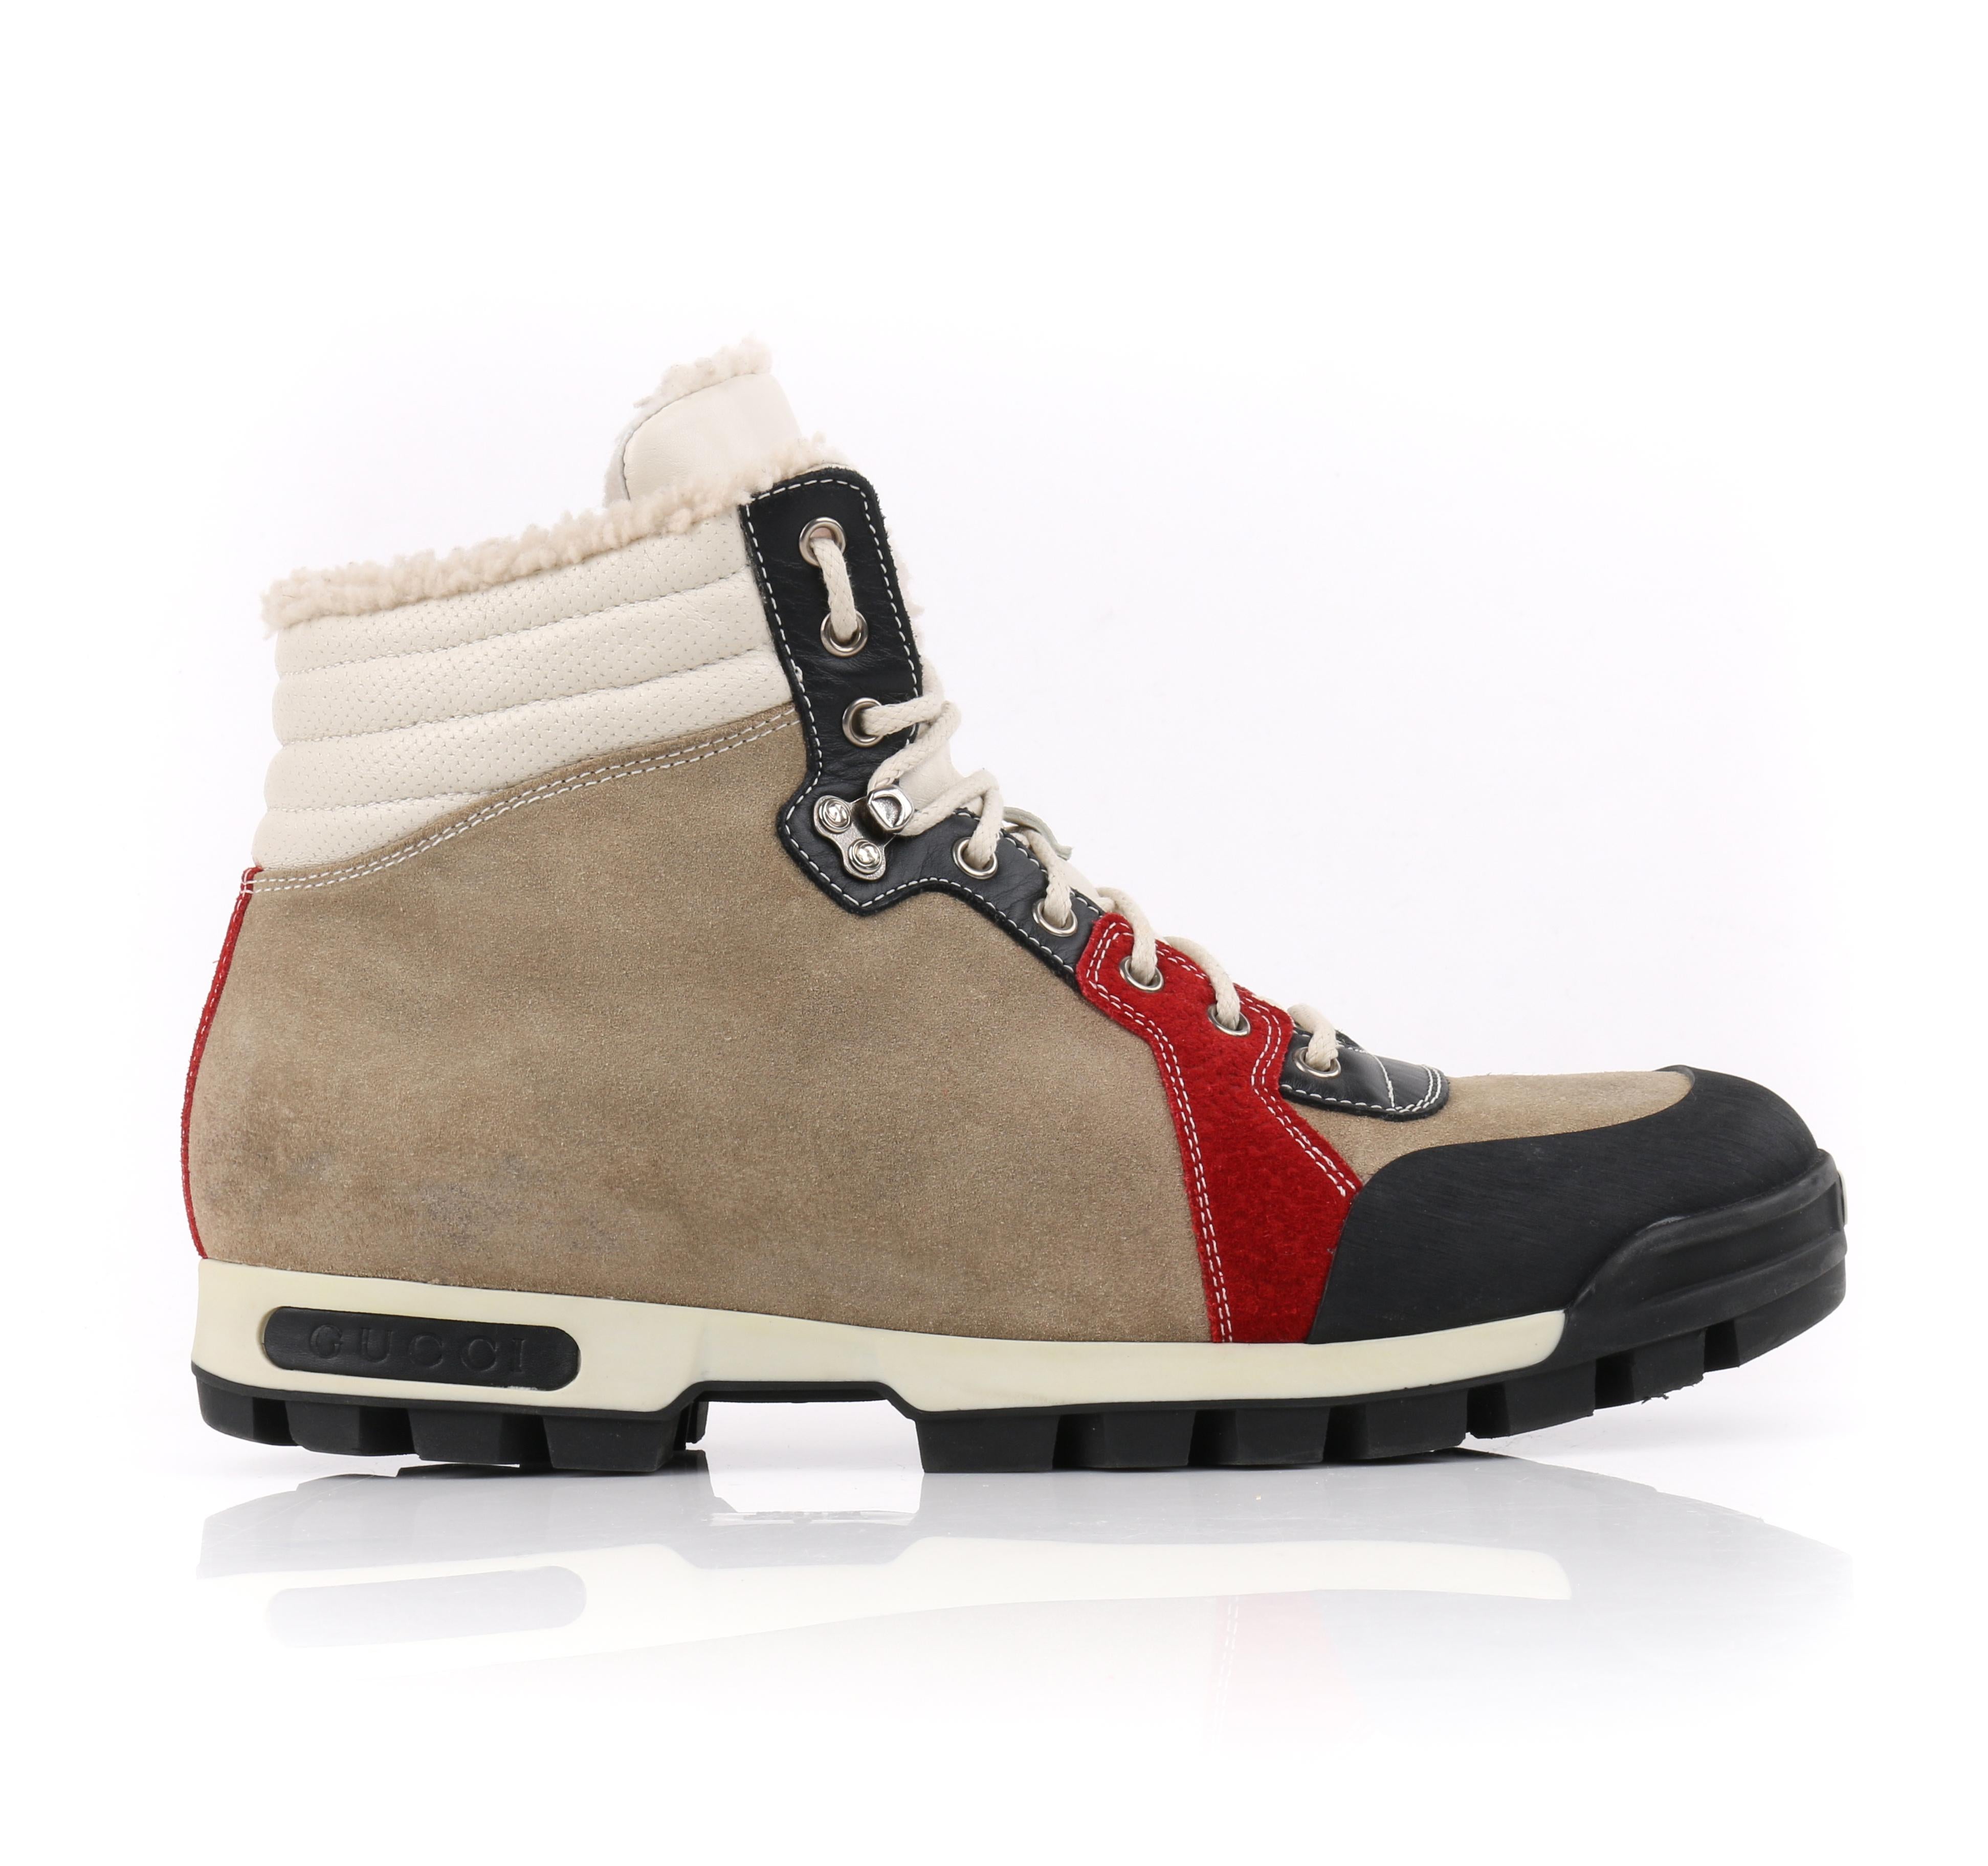 DESCRIPTION: GUCCI Suede Leather Shearling Lace Front Lug Sole Hiking Boots 
 
Brand / Manufacturer: Gucci
Style: Boots
Color(s): Tan with shades of red and black
Lined: Yes
Unmarked Fabric Content (feel of): Upper: suede; lining: shearling (at